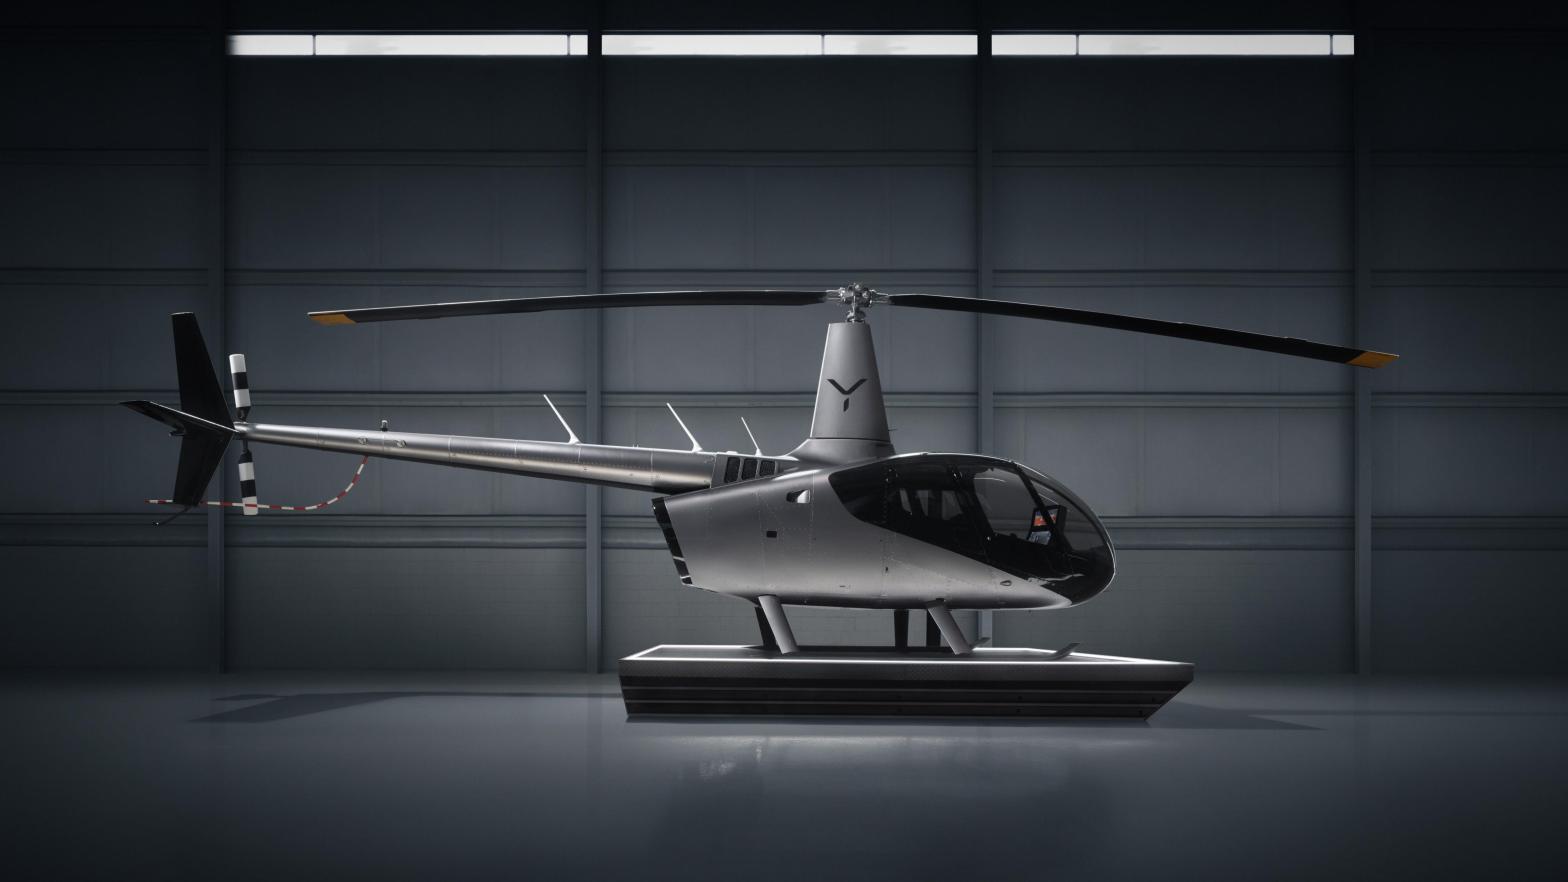 Revolutionary Fly-by-Wire Helicopter Promises Takeoff With a Touchscreen Swipe